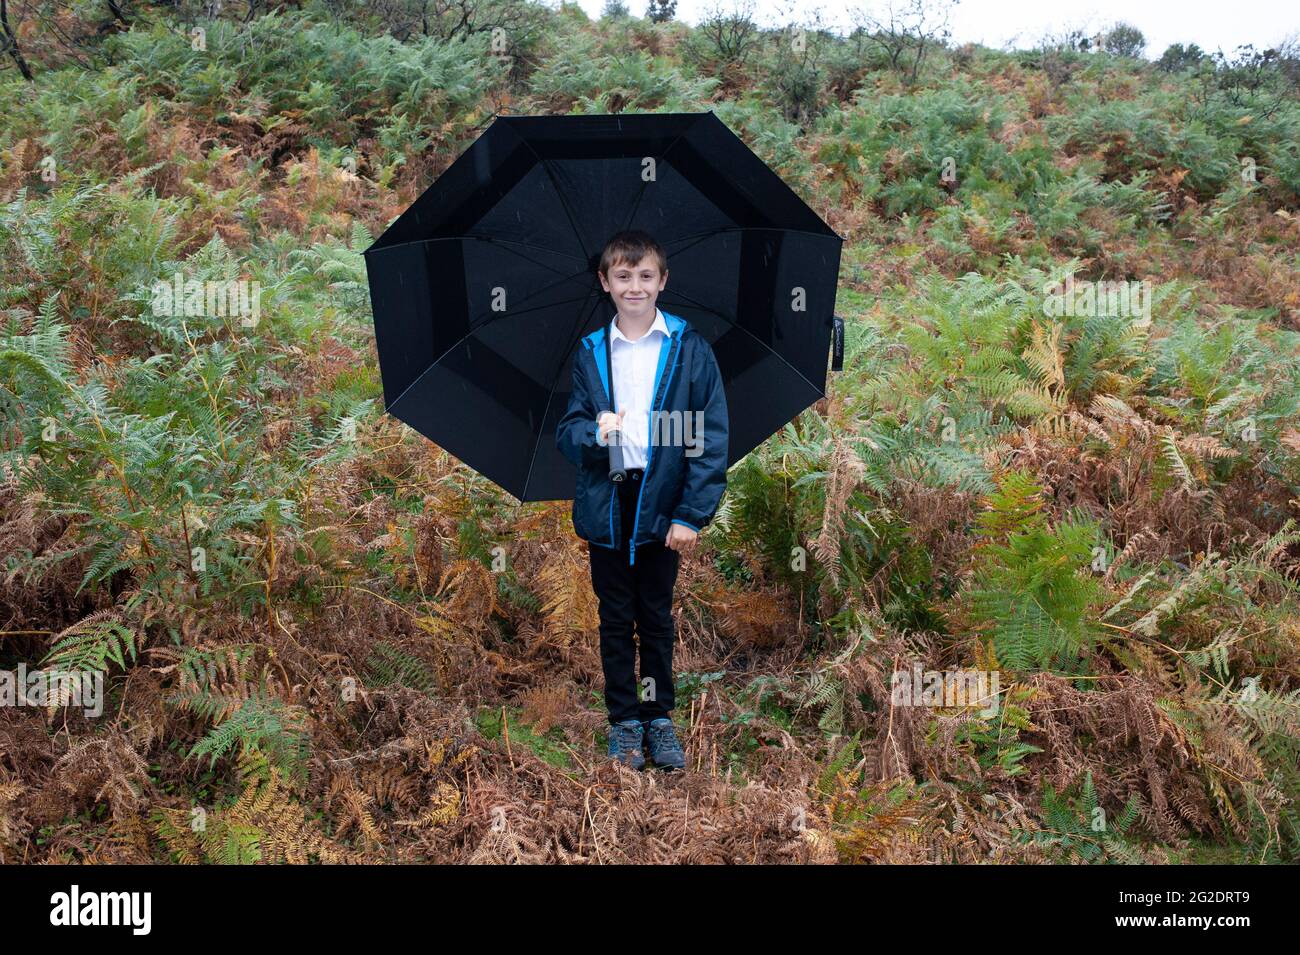 A young boy stands in the rain holding a big umbrella in the New Forest. Stock Photo